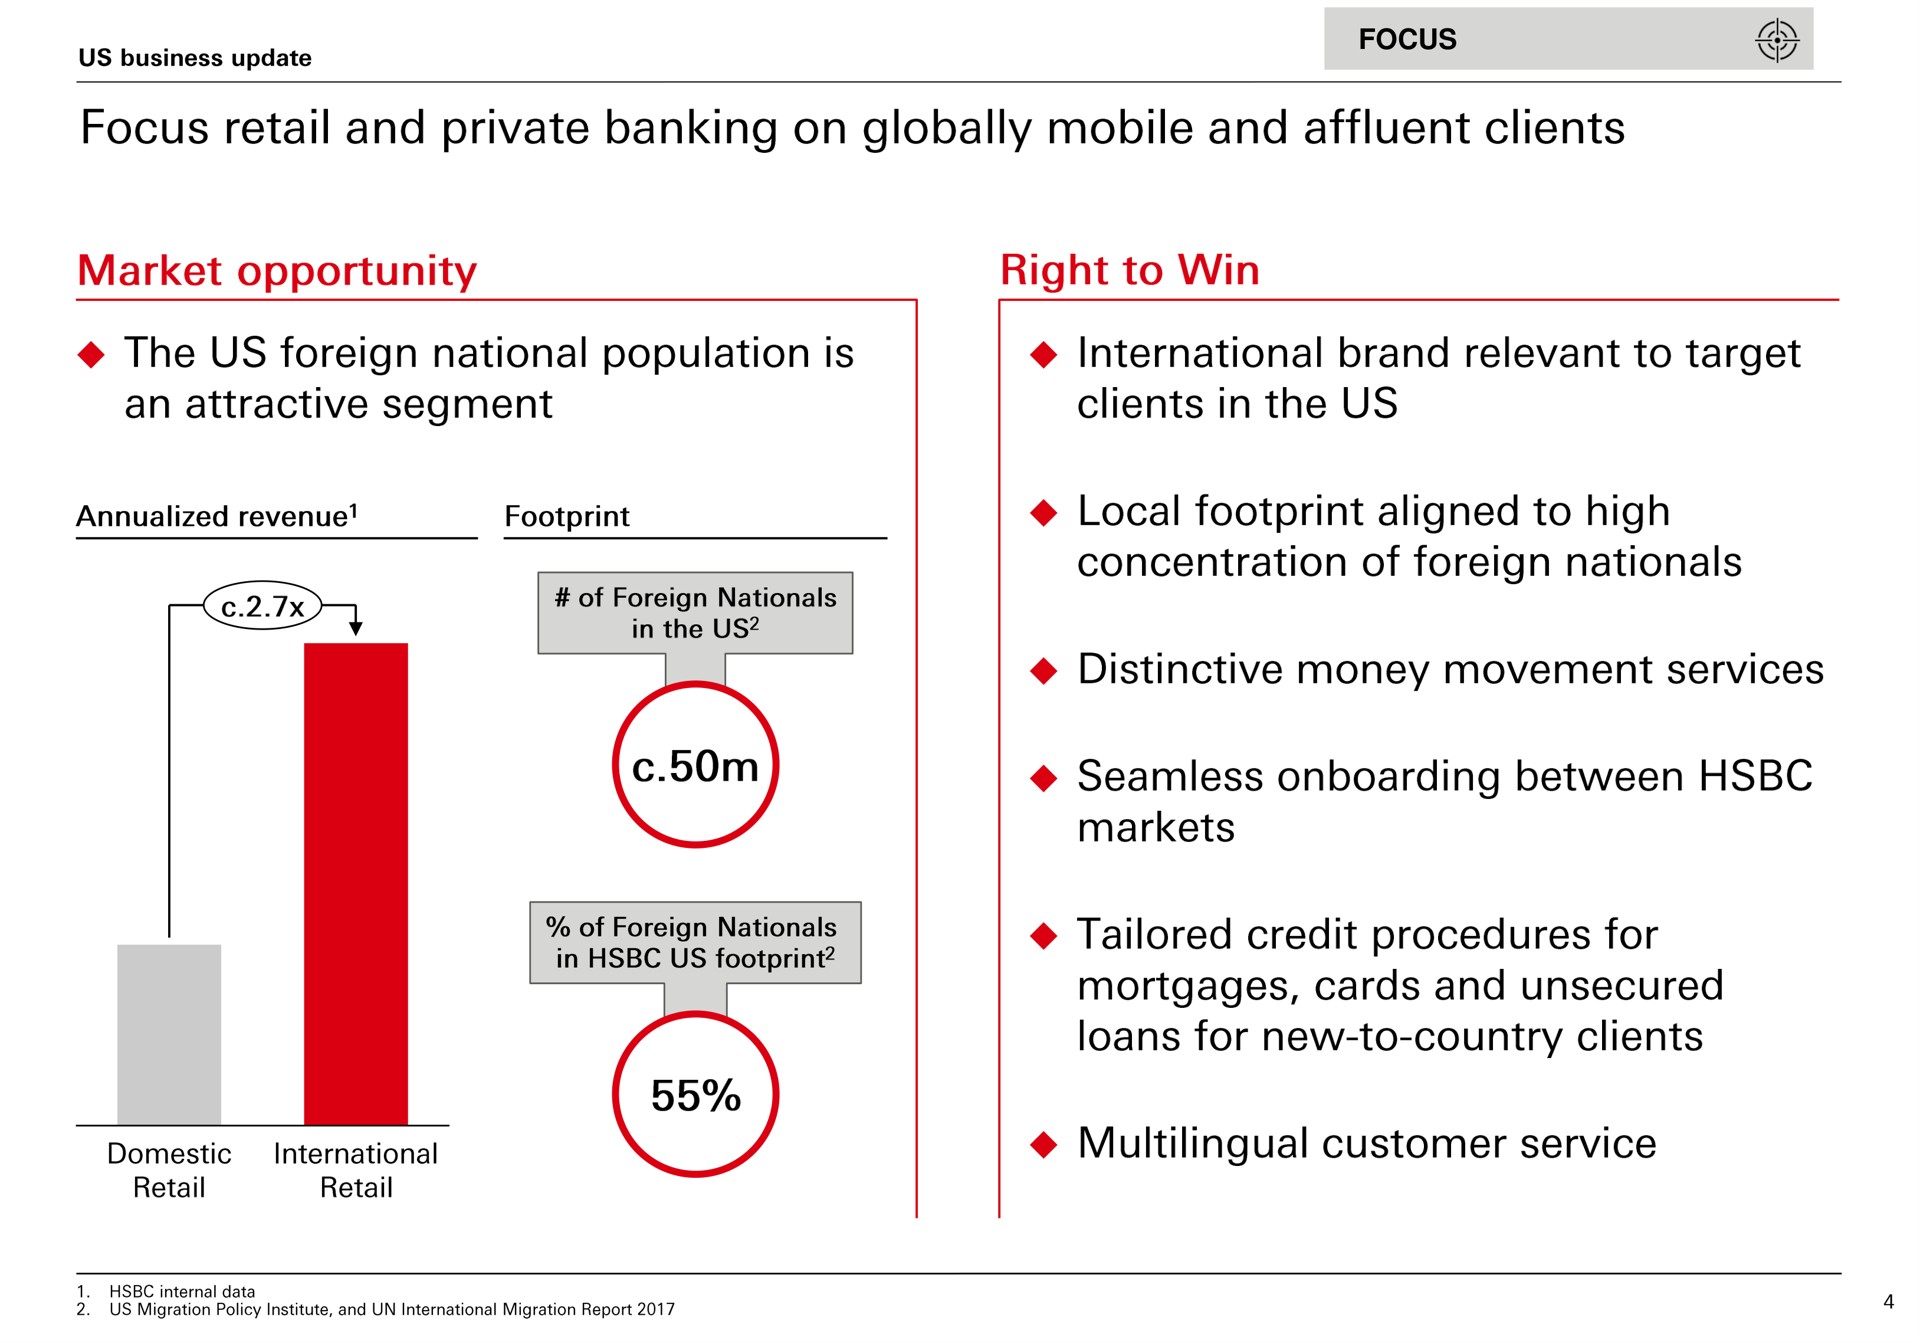 focus an retail and private banking on globally mobile and affluent clients right to win the us foreign national population is international brand relevant to target an attractive segment clients in the us local footprint aligned to high concentration of foreign nationals distinctive money movement services seamless between markets tailored credit procedures for mortgages cards and unsecured multilingual customer service | HSBC